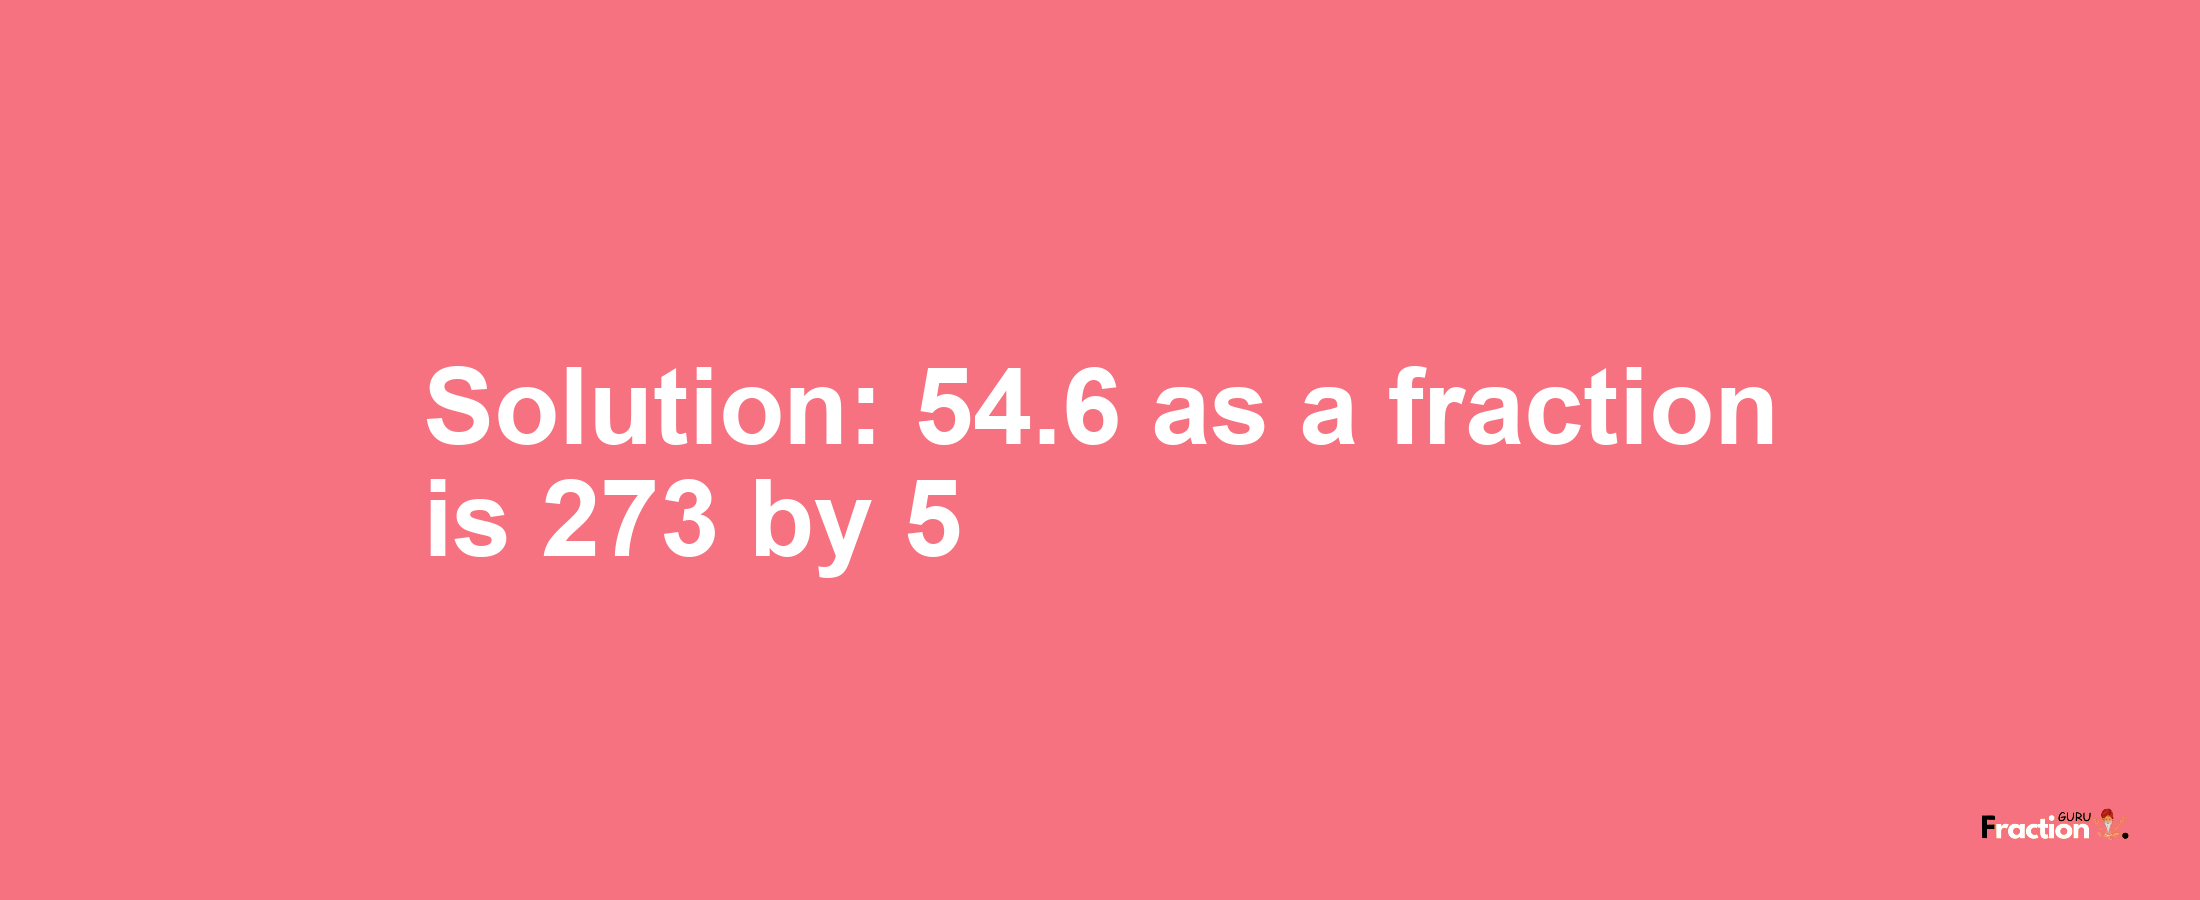 Solution:54.6 as a fraction is 273/5